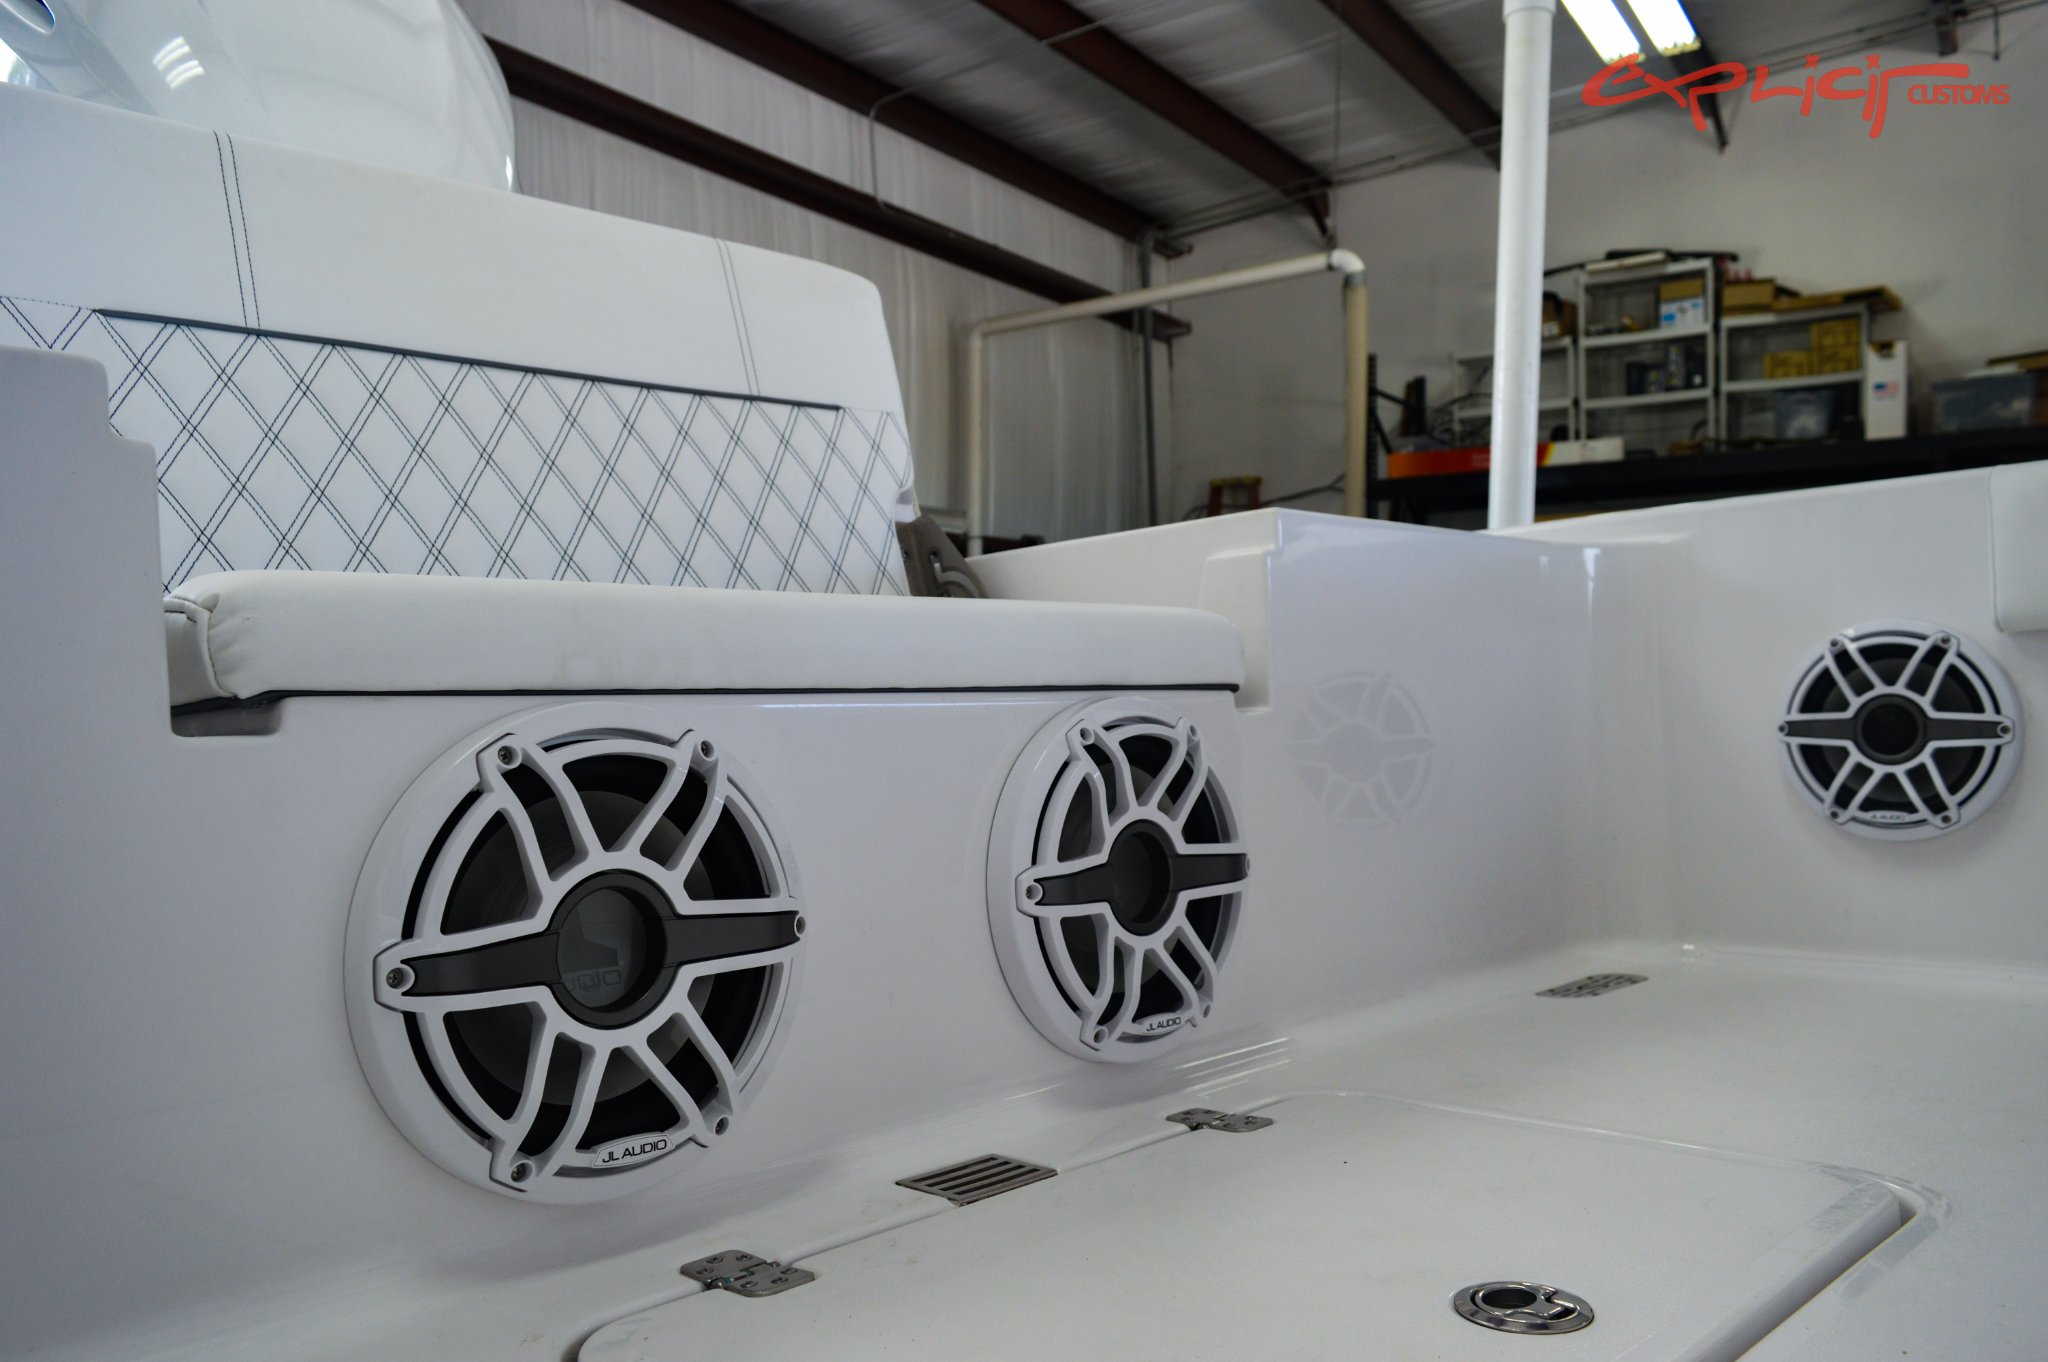 JL Audio Boat and Marine Speakers Sound System Installation by Explicit Customs Melbourne FL